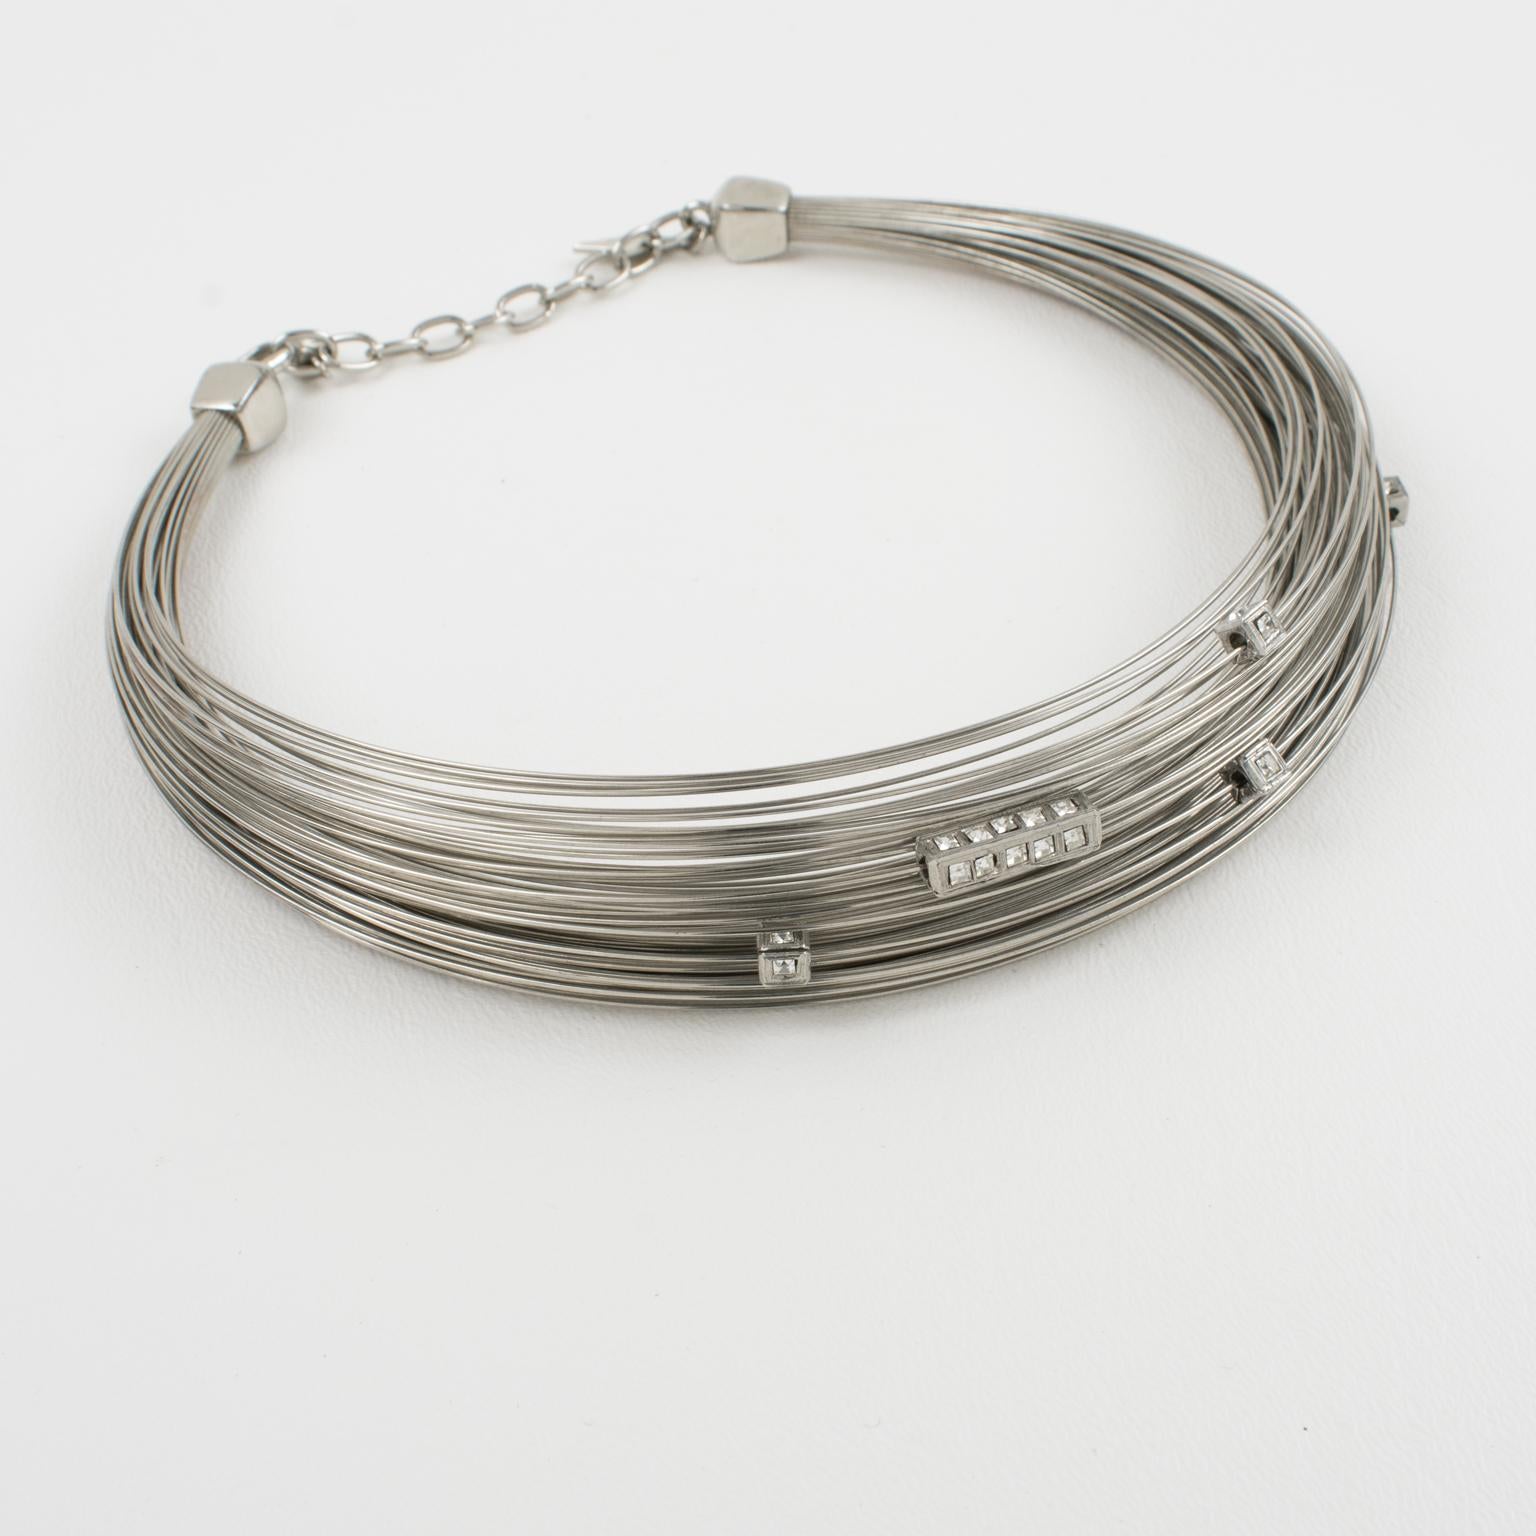 Thierry Mugler Silvered Metal Multi-Strand Wire Choker Necklace In Good Condition For Sale In Atlanta, GA